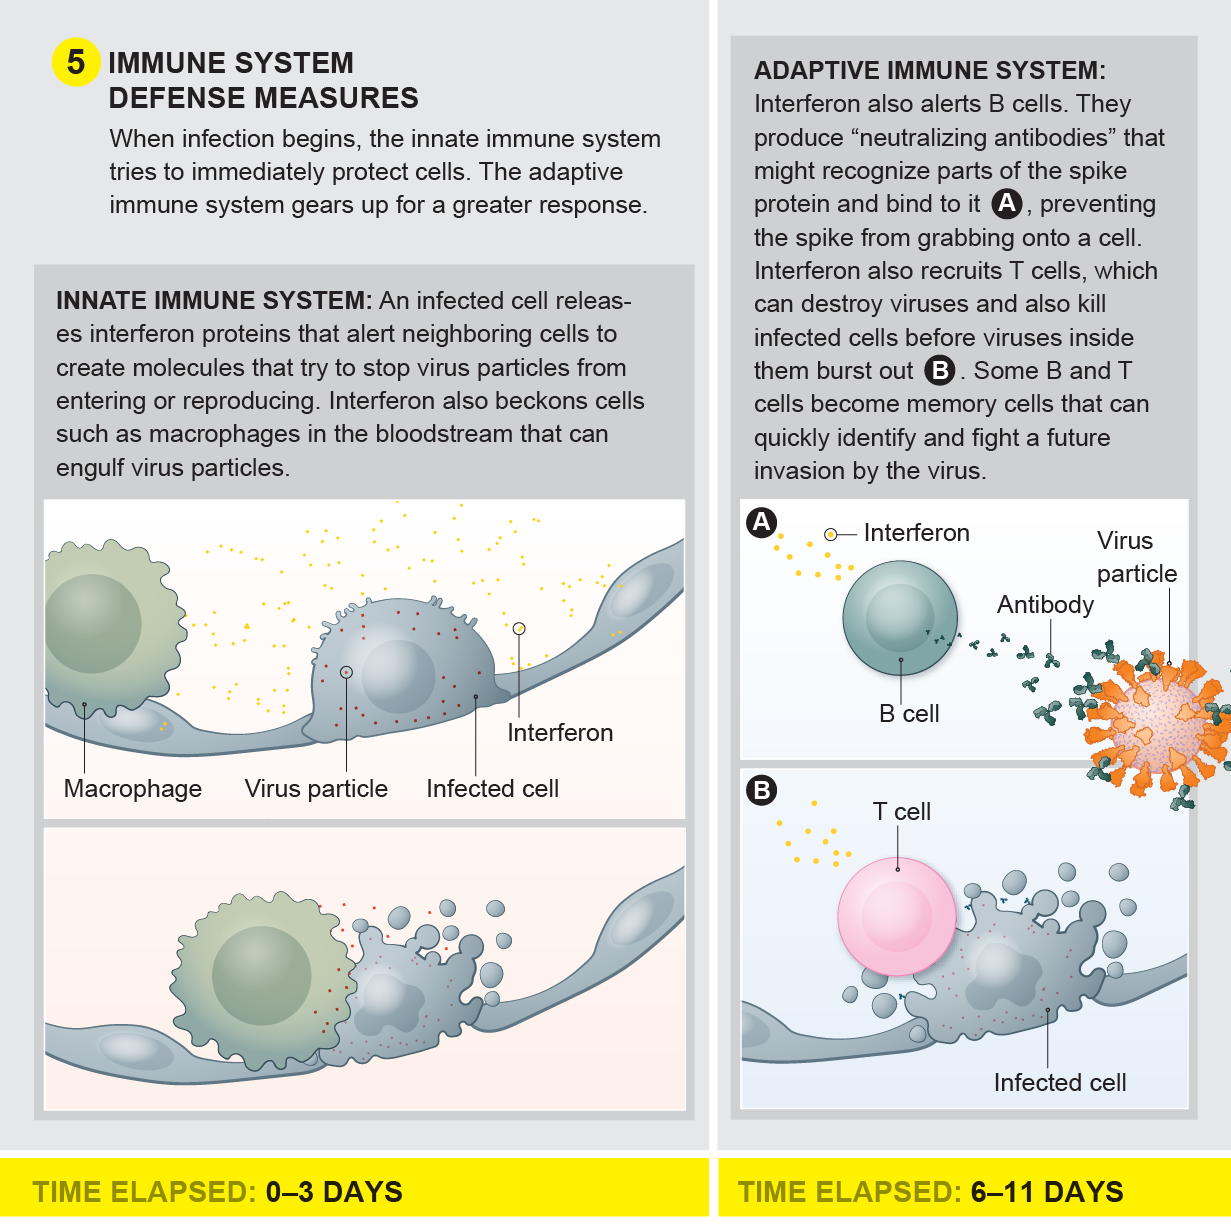 The immune system defense measures